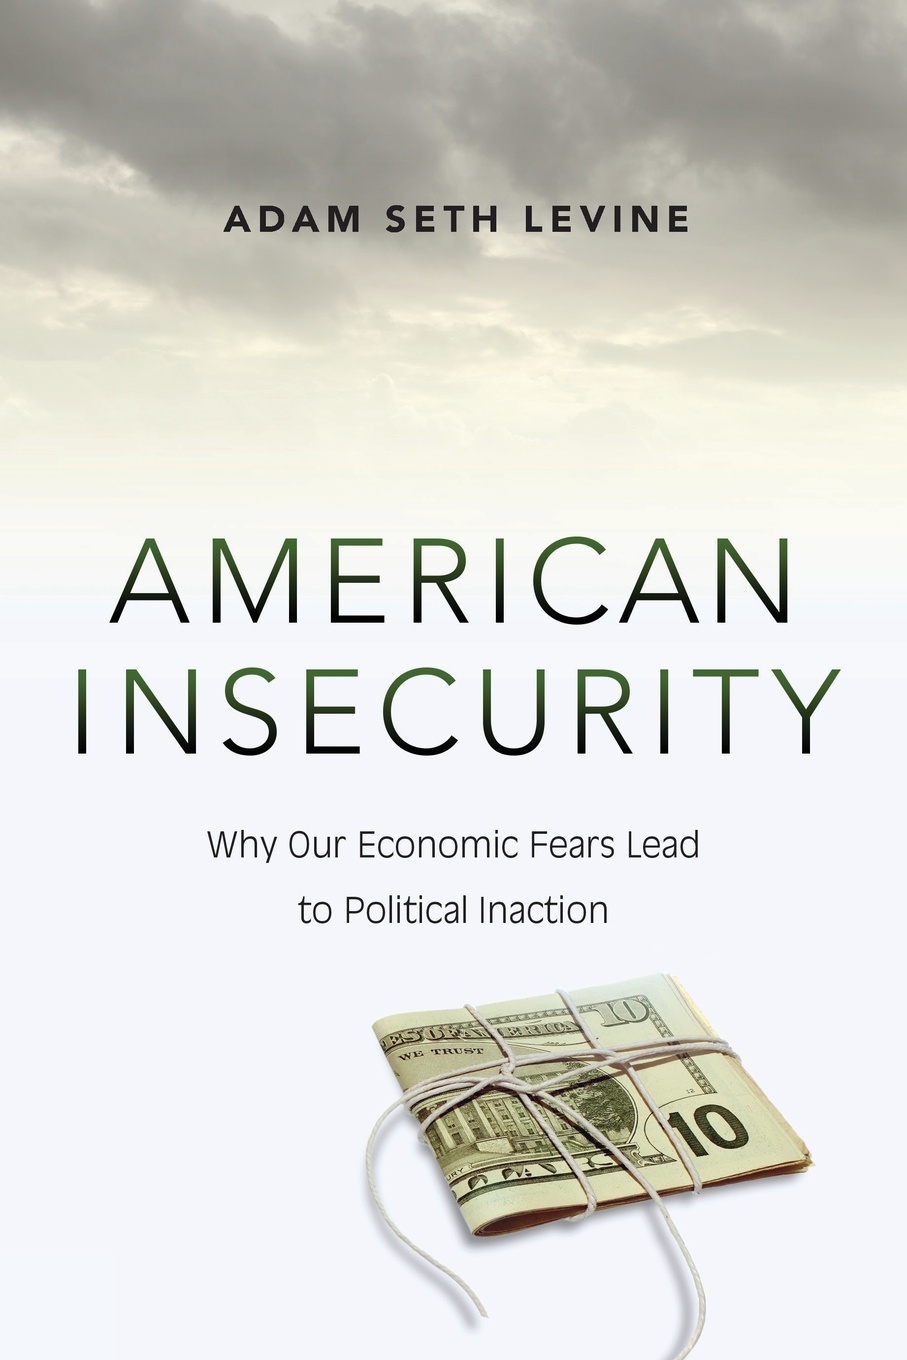 American Insecurity. Why Our Economic Fears Lead to Political Inaction